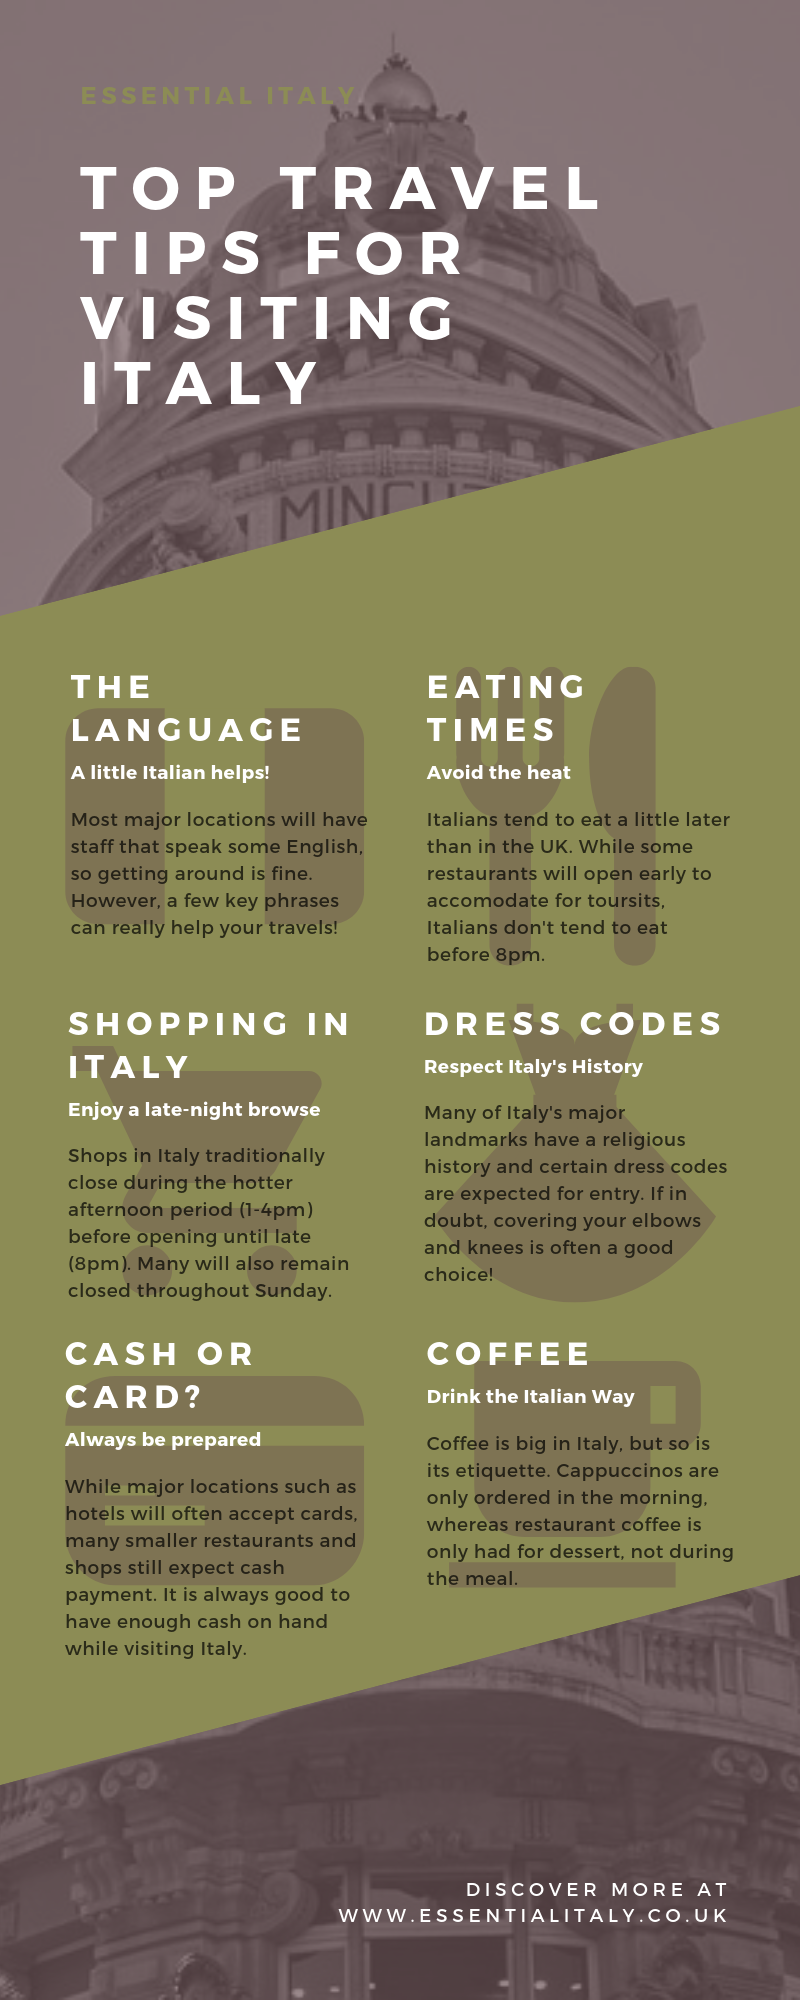 An Essential Italy infographic about the top travel tips for visiting Italy